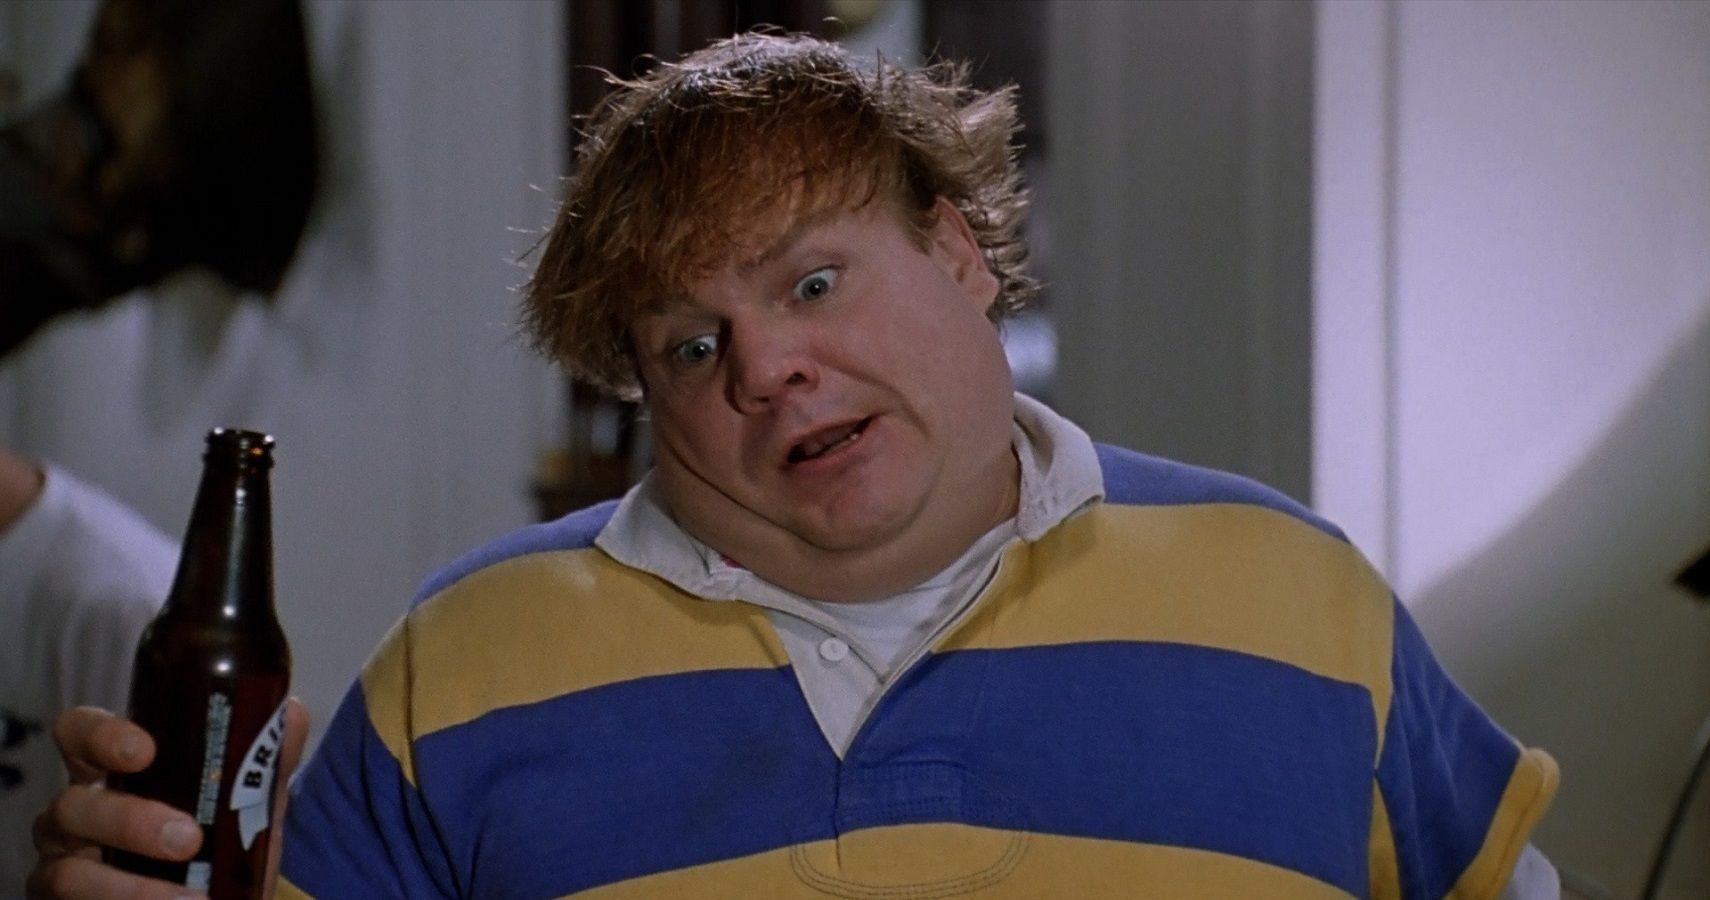 10 Behind-The-Scenes Facts About The Making Of Tommy Boy (1995)